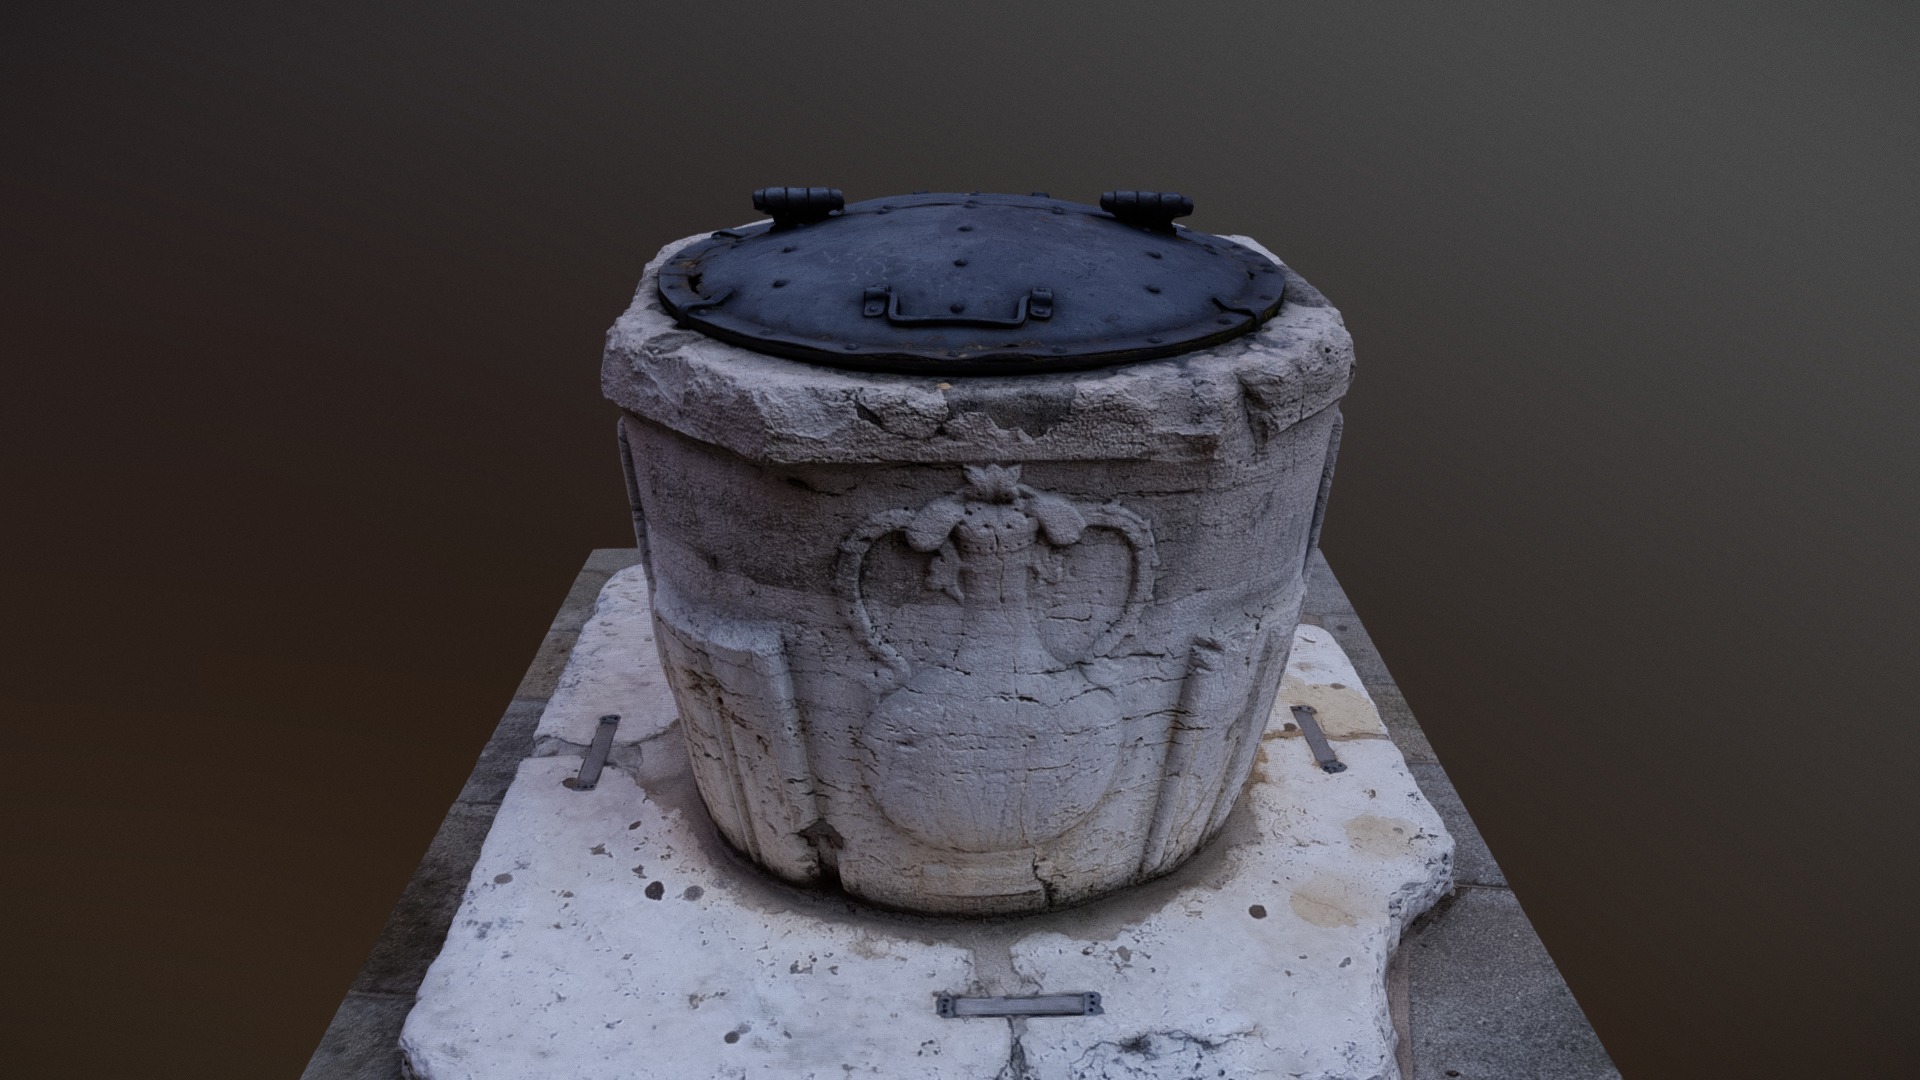 3D model Venice well SC185W at Corte Candi - This is a 3D model of the Venice well SC185W at Corte Candi. The 3D model is about a stone with a face carved into it.